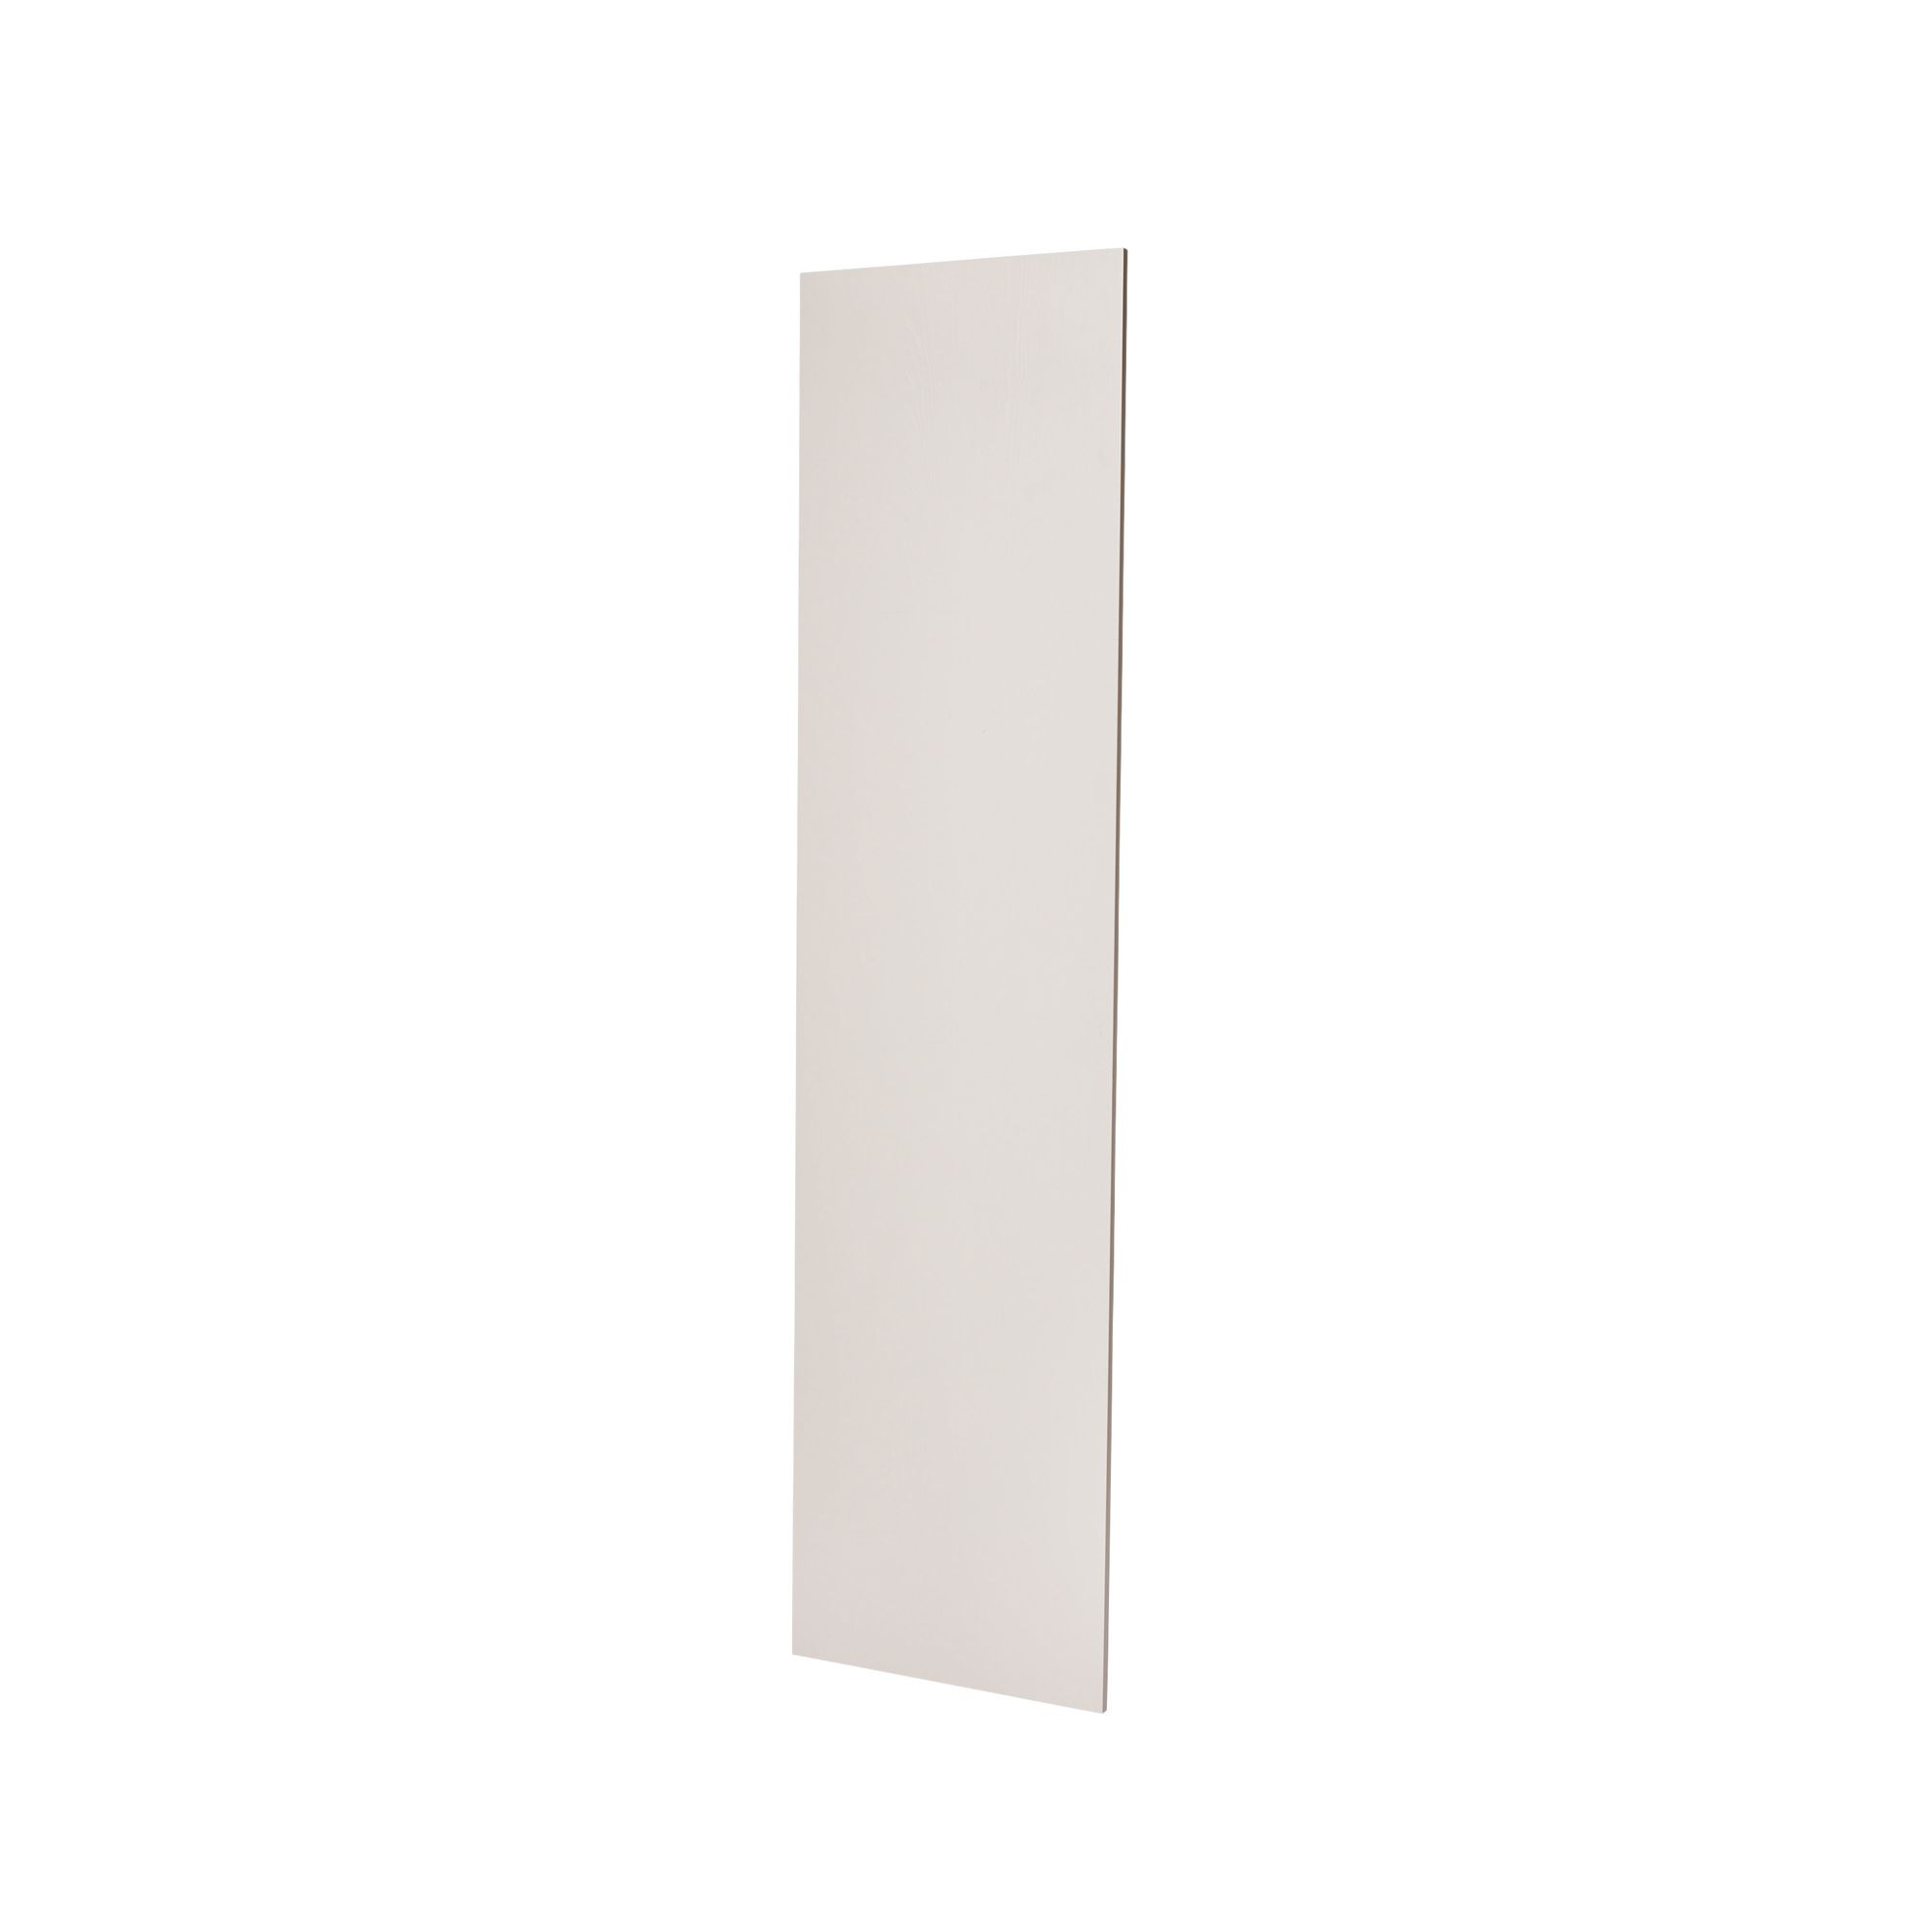 GoodHome Verbena Cashmere painted natural ash shaker Tall Appliance & larder End panel (H)2400mm (W)610mm